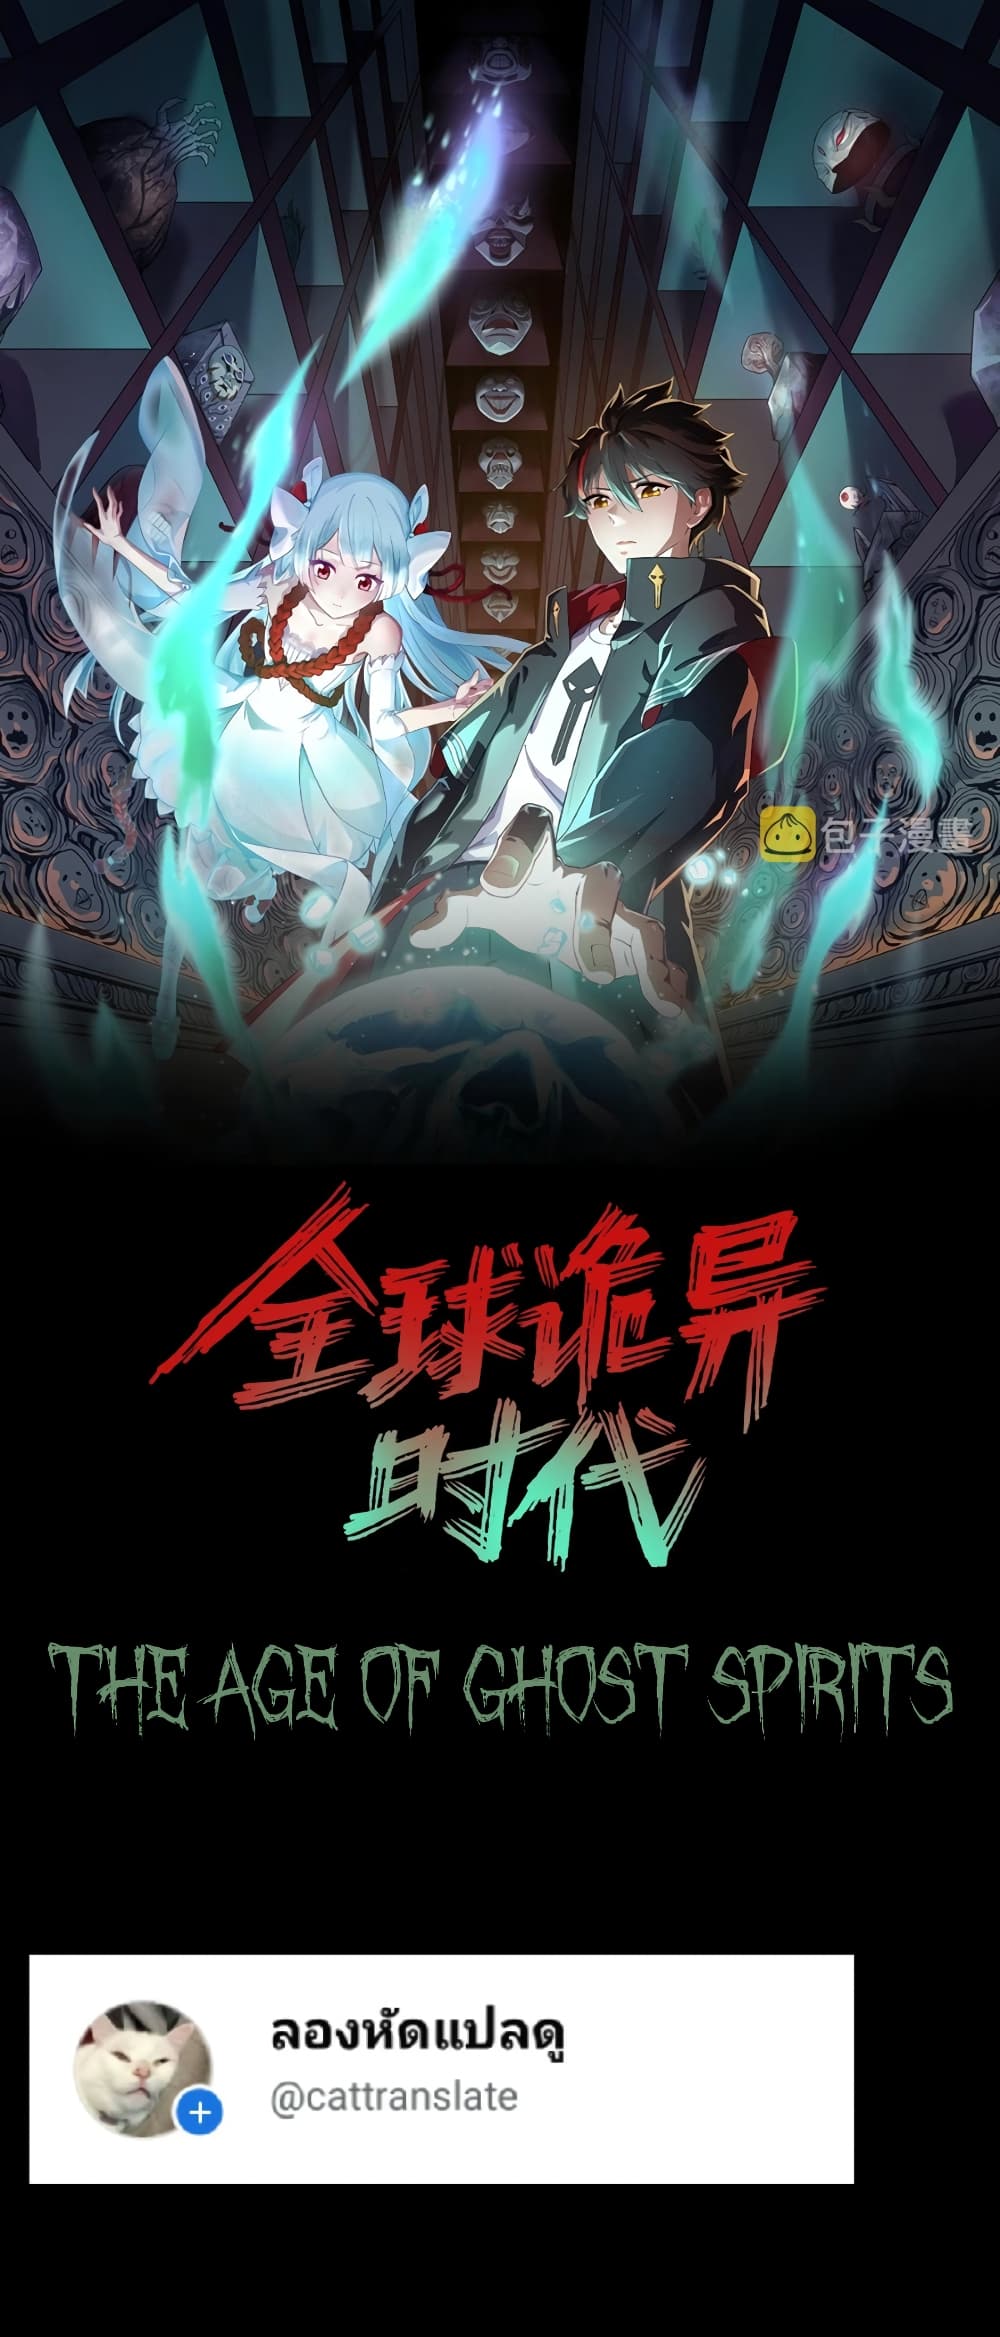 The Age of Ghost Spirits à¸à¸­à¸à¸à¸µà¹ 30 (1)